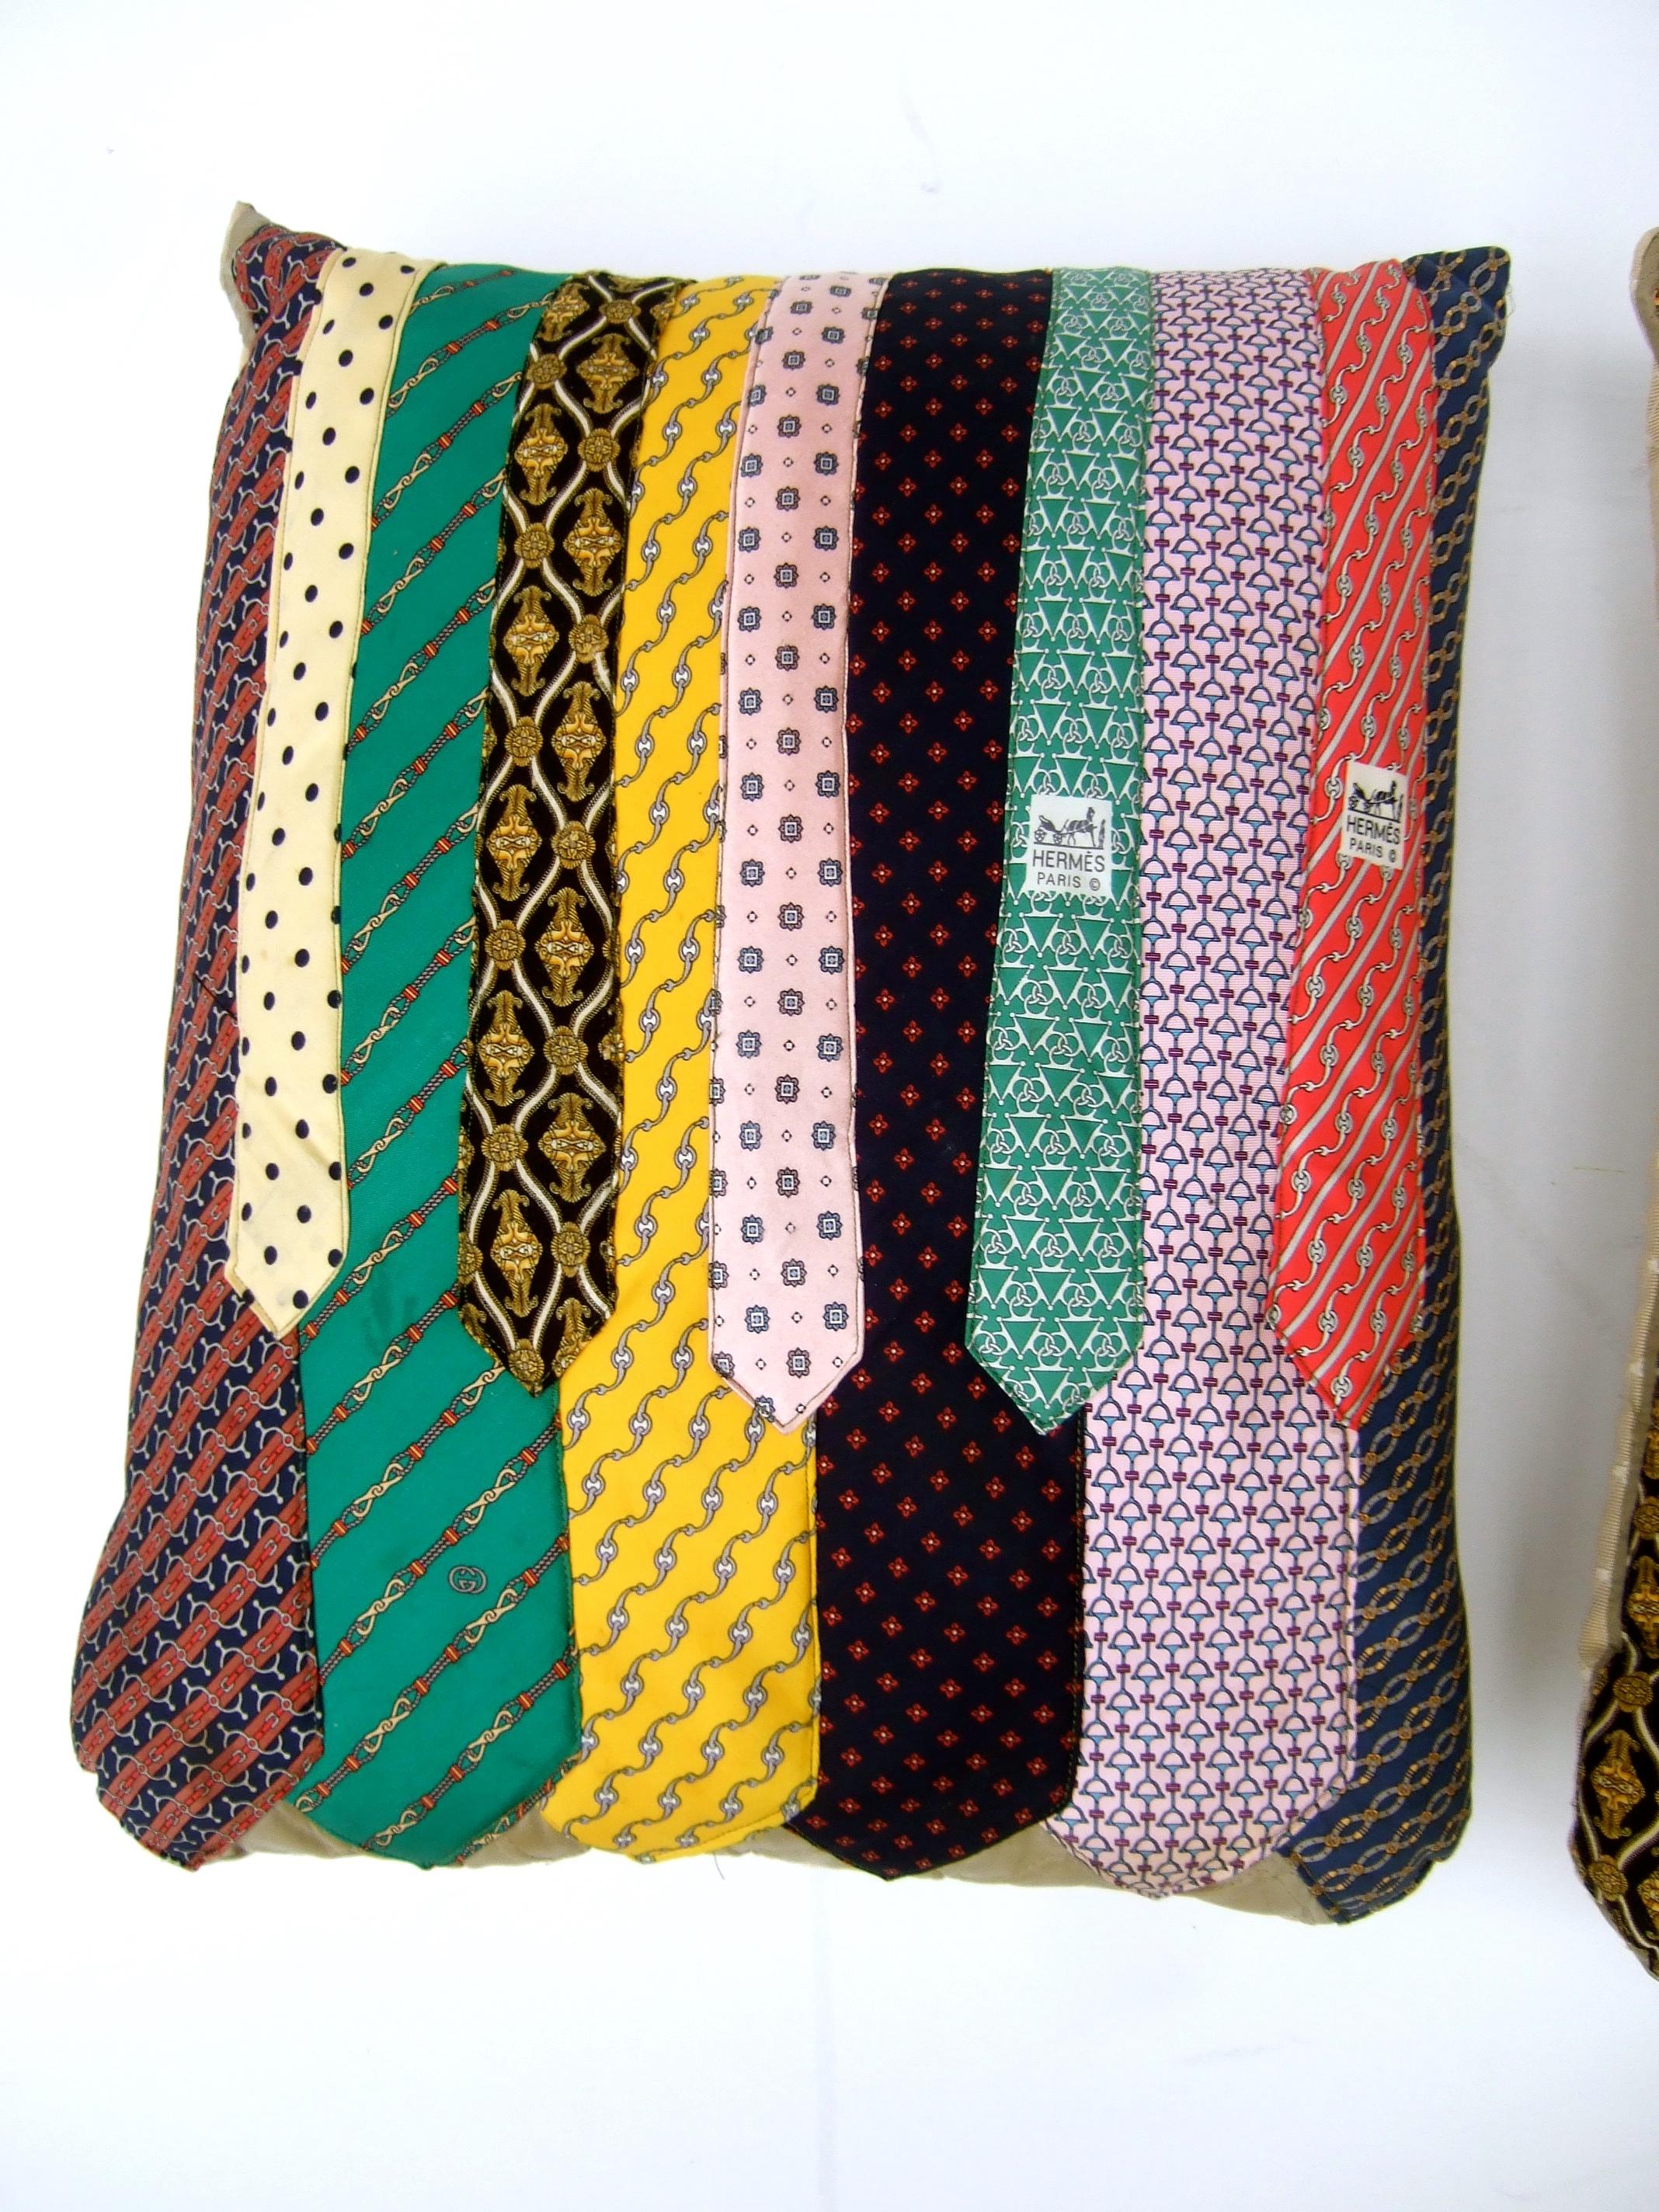 Women's Pair of Vintage Hermes & Gucci Silk Necktie Up-cycled Handmade Pillows c 1980s  For Sale